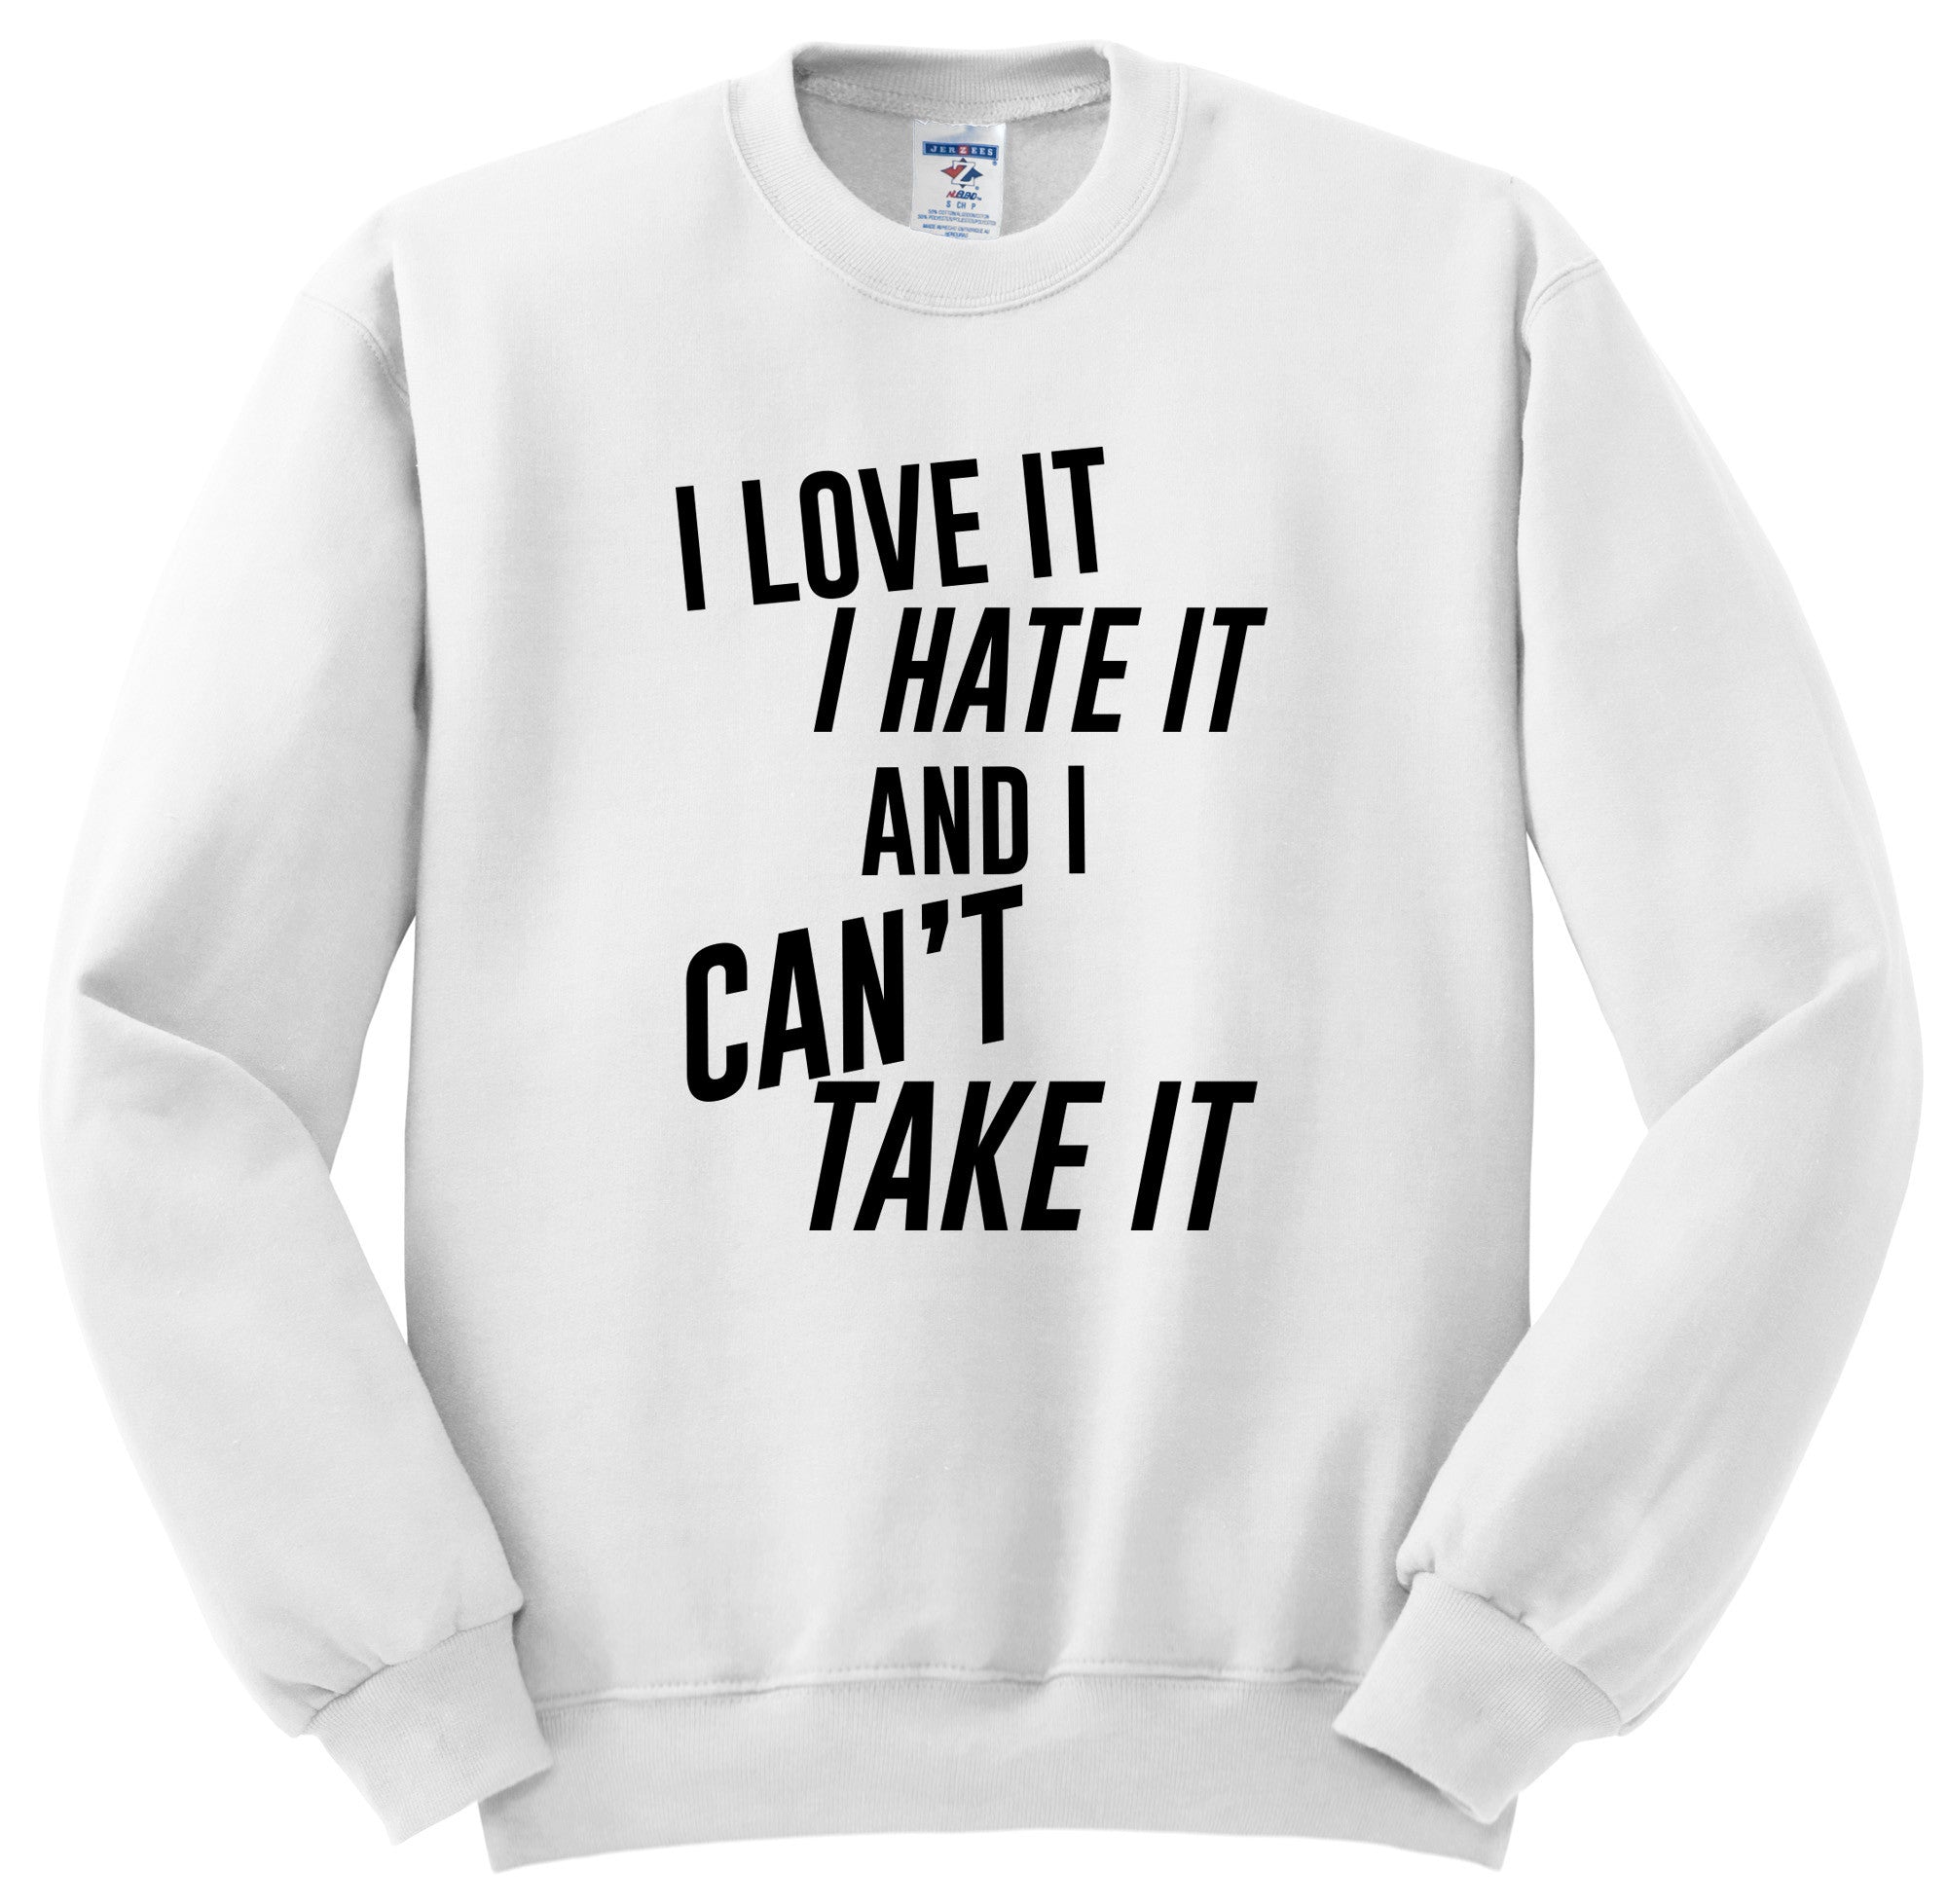 Louis Tomlinson / Bebe Rexha “Back to You – I Love It I Hate It And I Can’t Take It” Crewneck ...